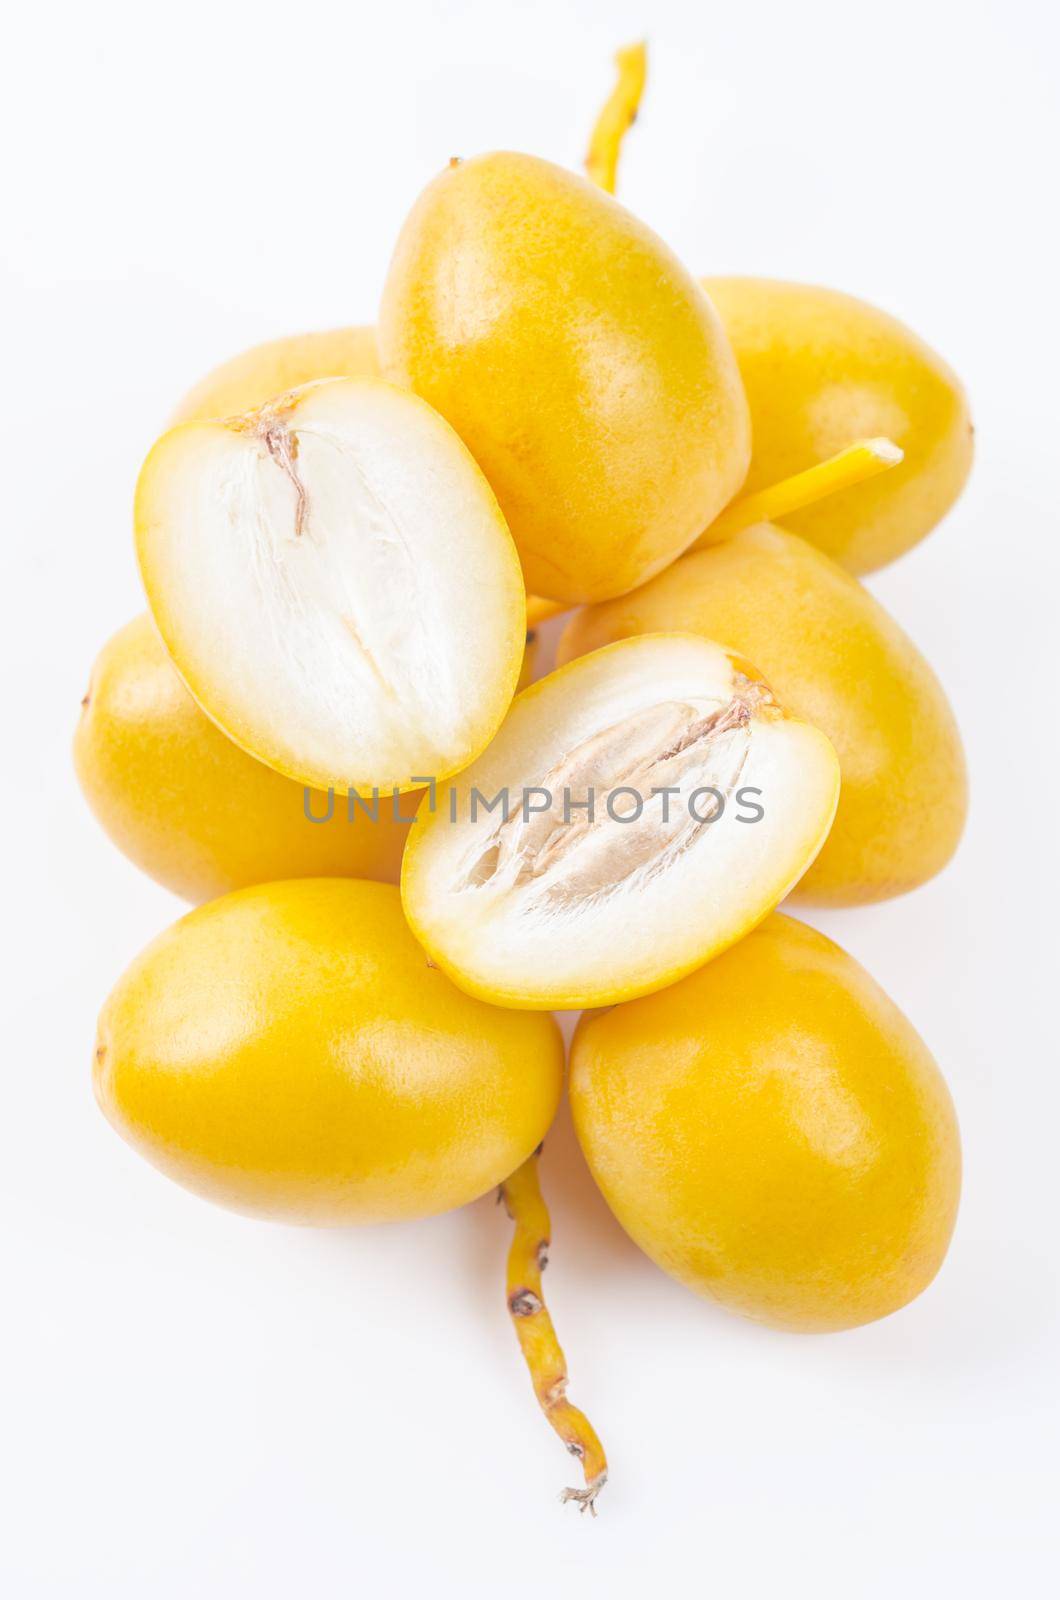 Fresh date palm fruits on white background.